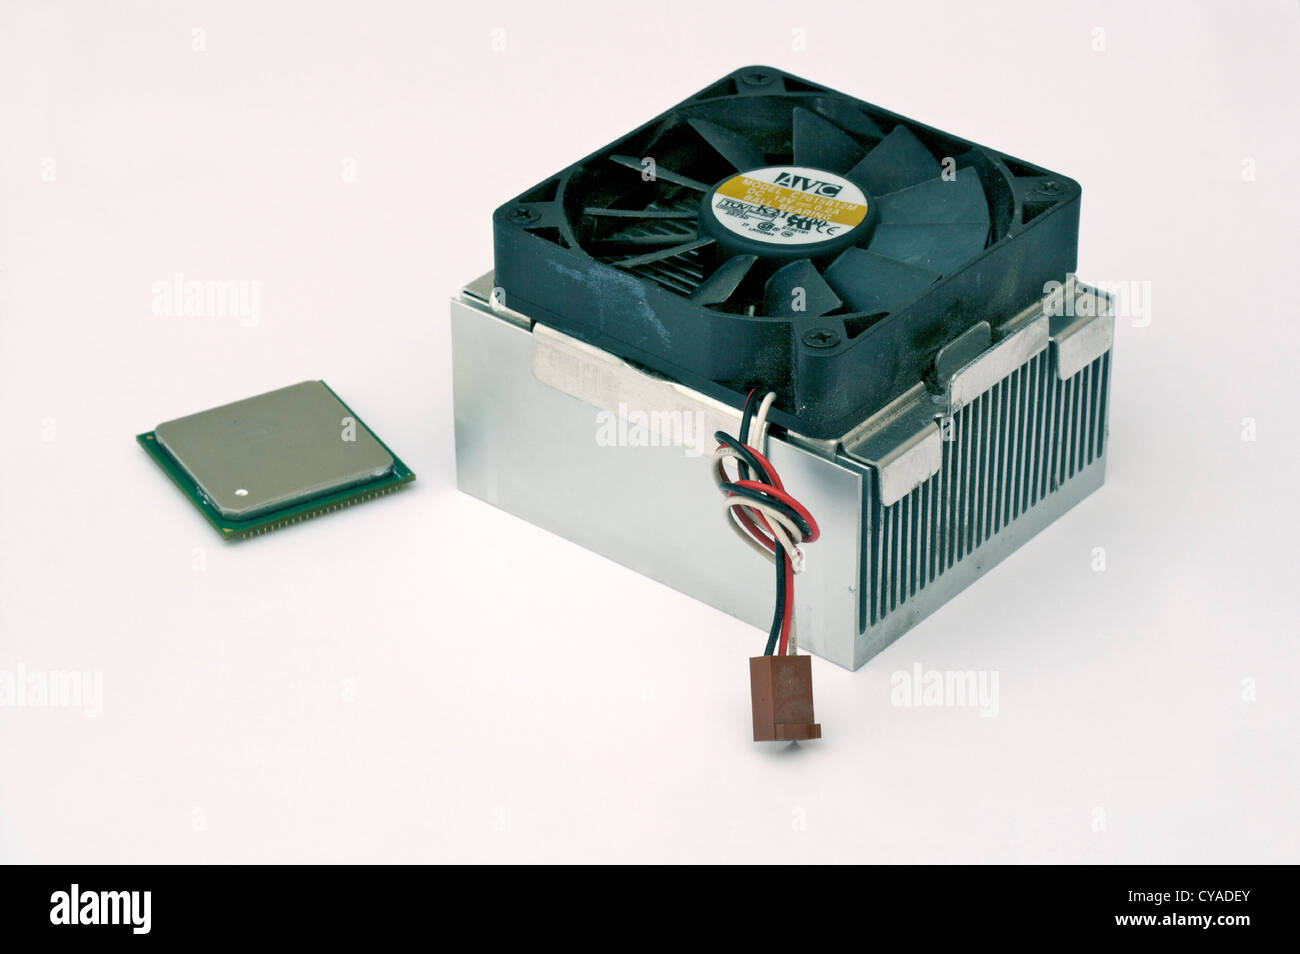 A PC central processor unit (CPU) chip and its heat sink with cooling fan standing on a plain background Stock Photo